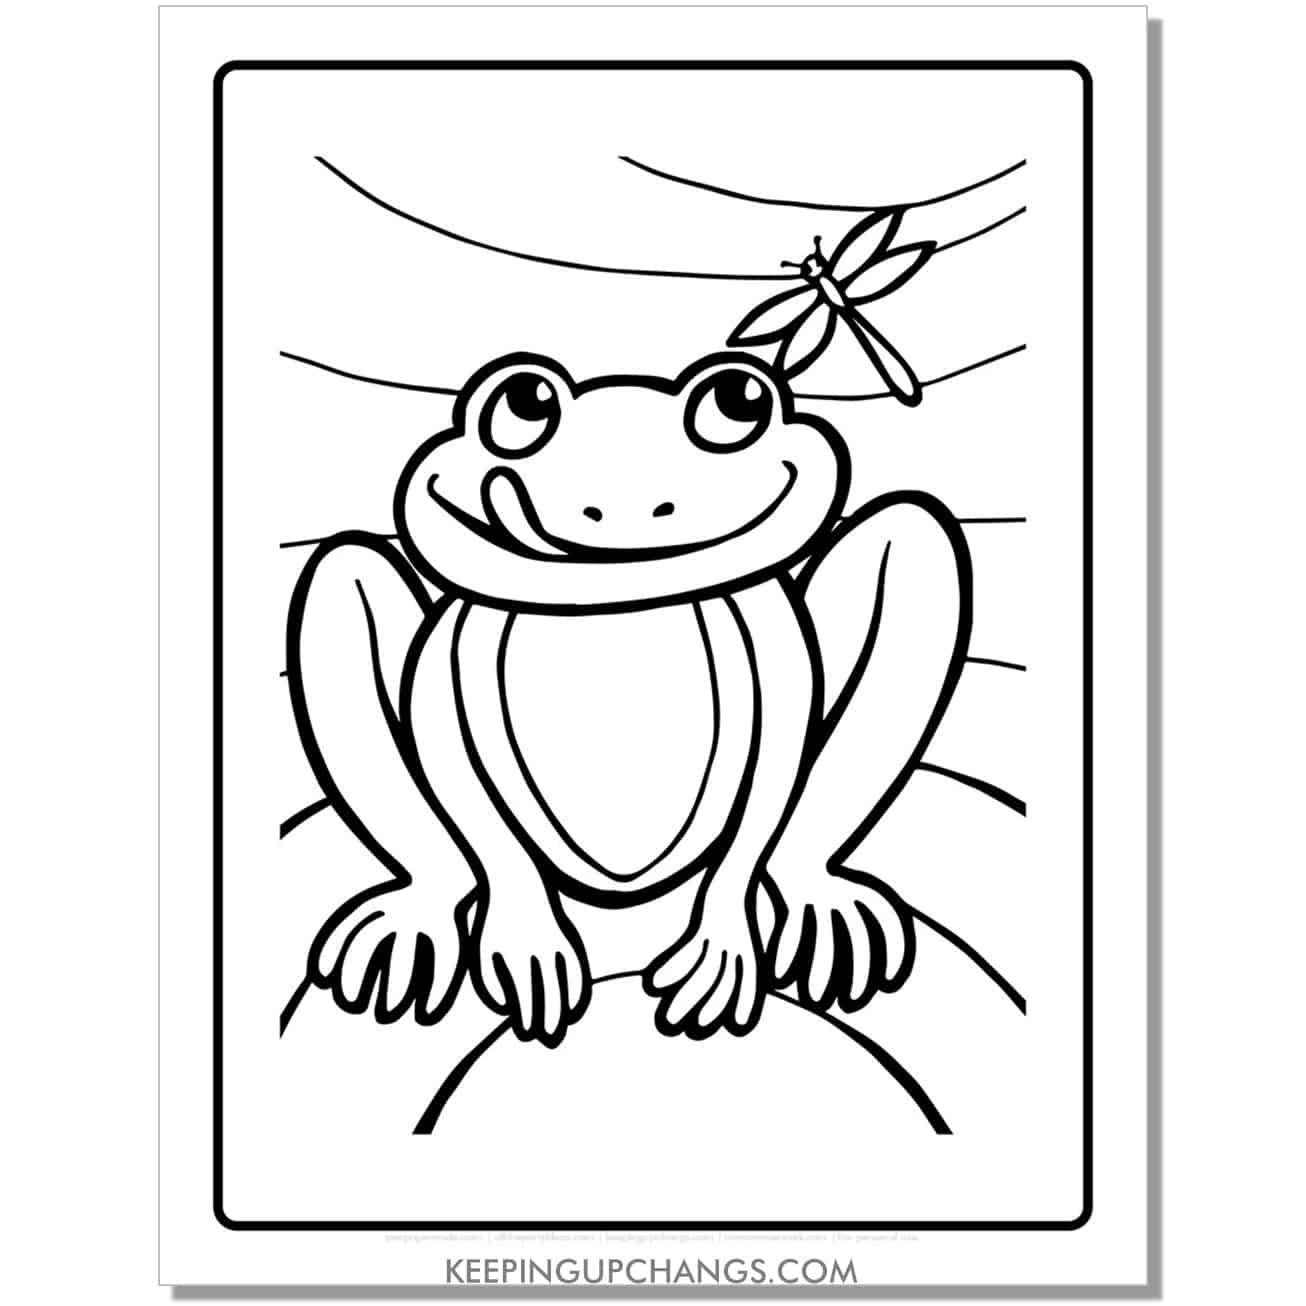 free simple frog coloring page, sheet with dragonfly.